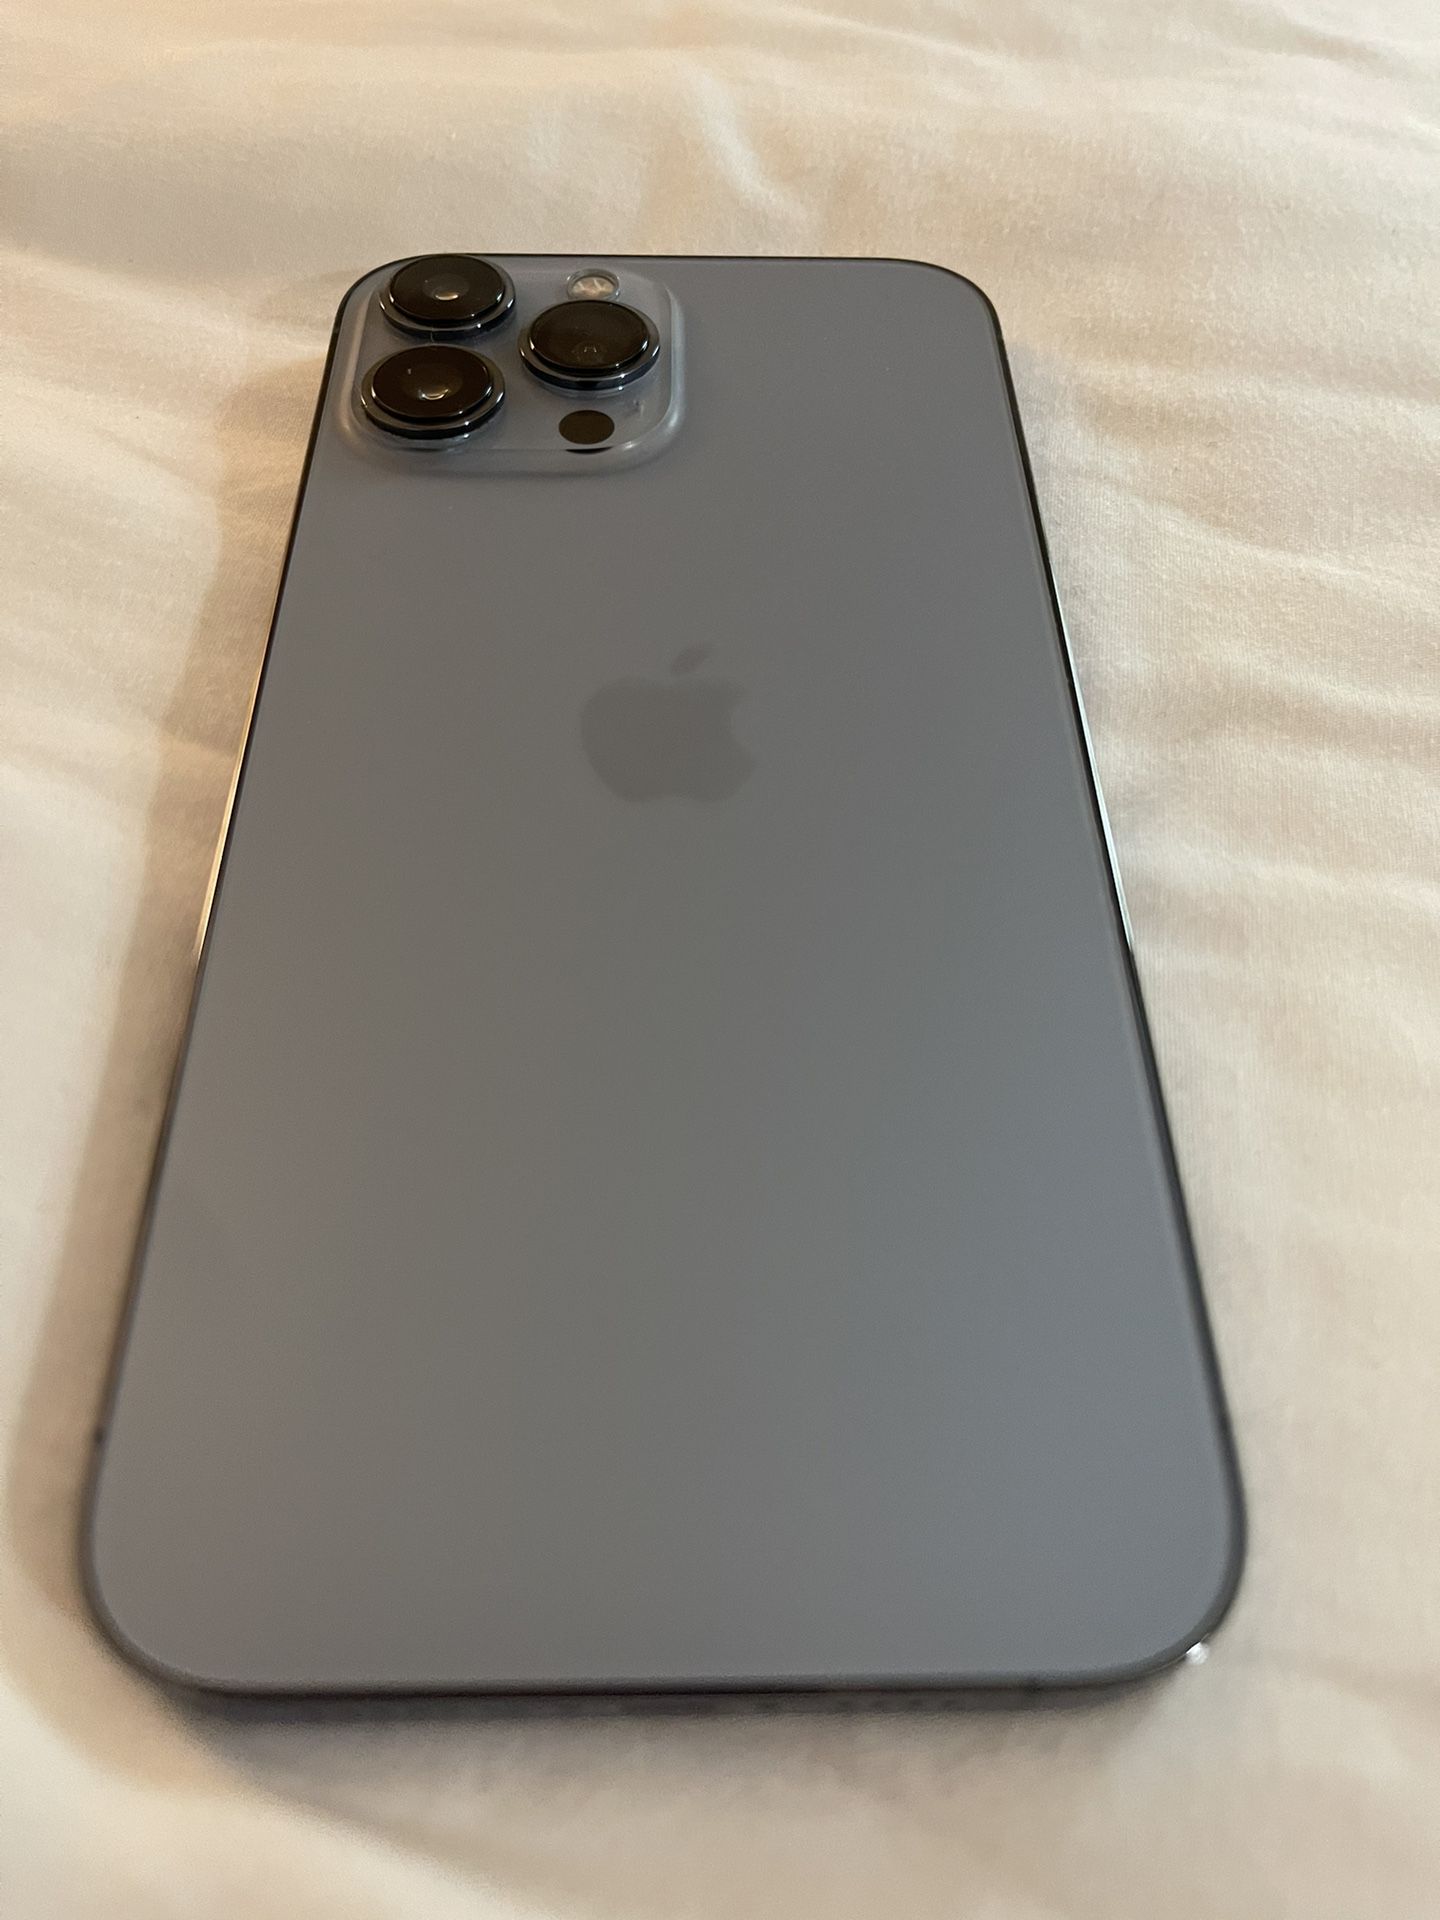 Iphone 11 Pro, Designer Phone Cases for Sale in San Diego, CA - OfferUp